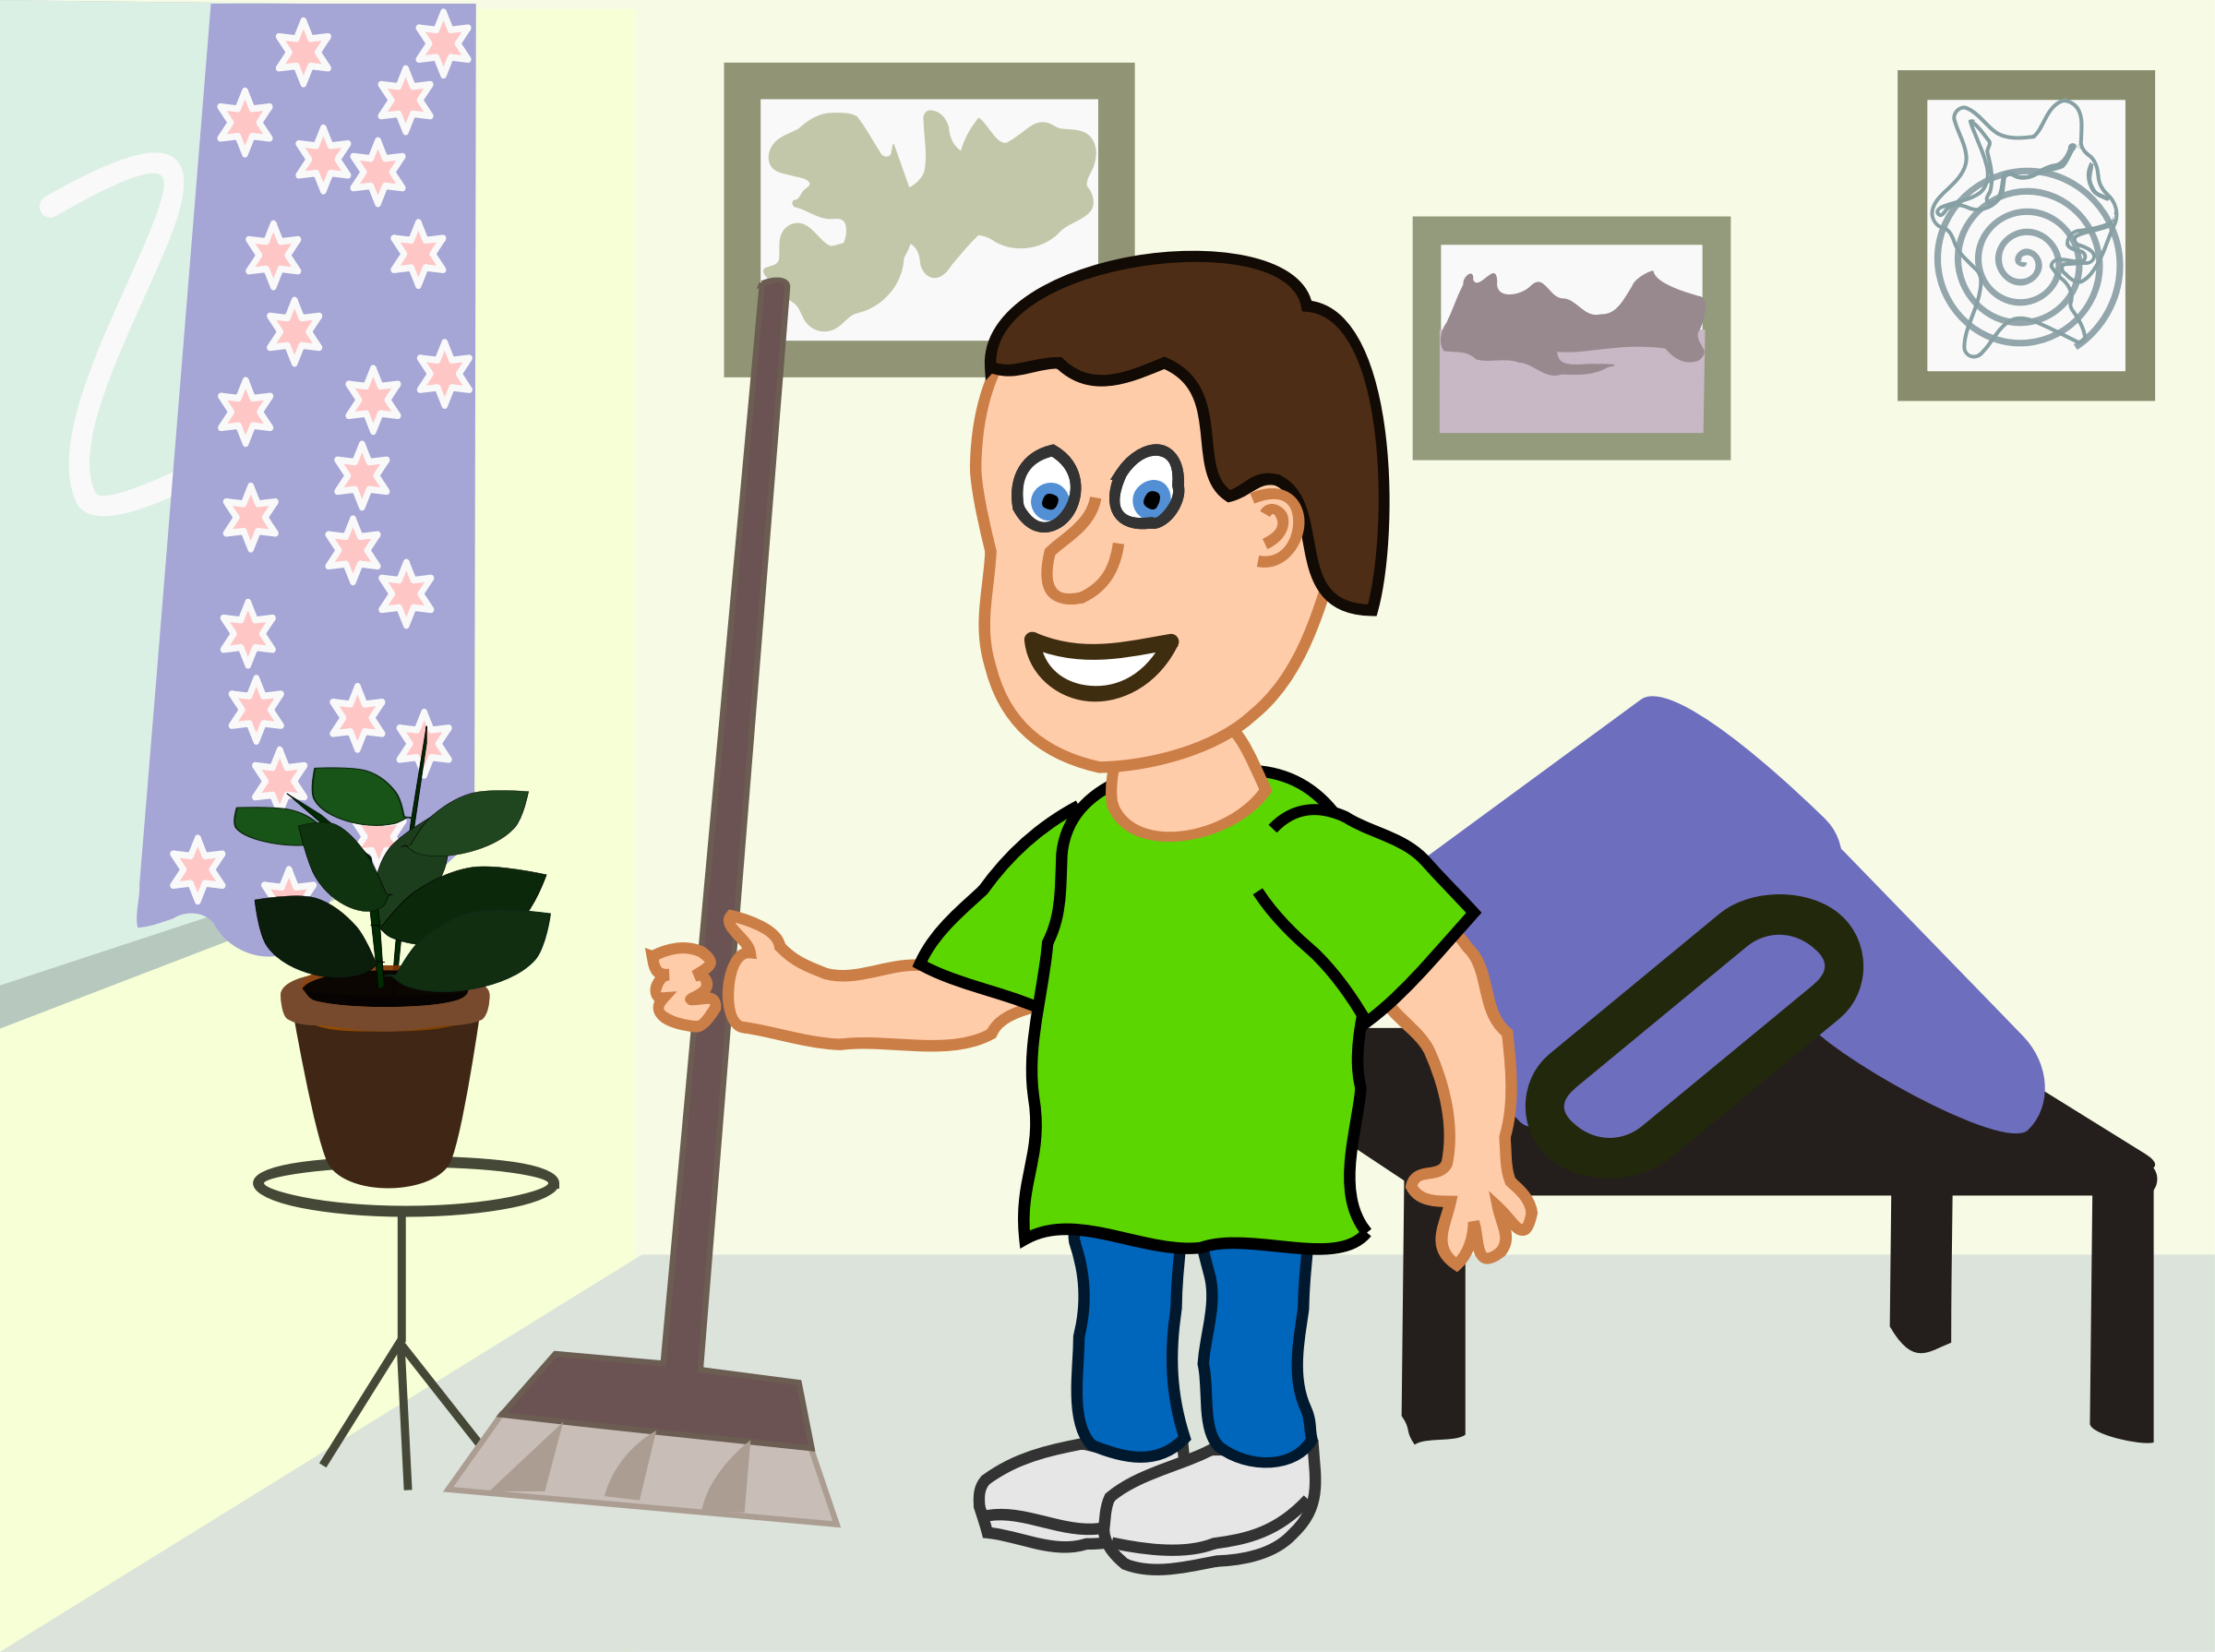 I were cleaning the house. Clean the Room рисунок для детей. Clean рисунок для детей. Уборка клипарт. Уборка cartoon.